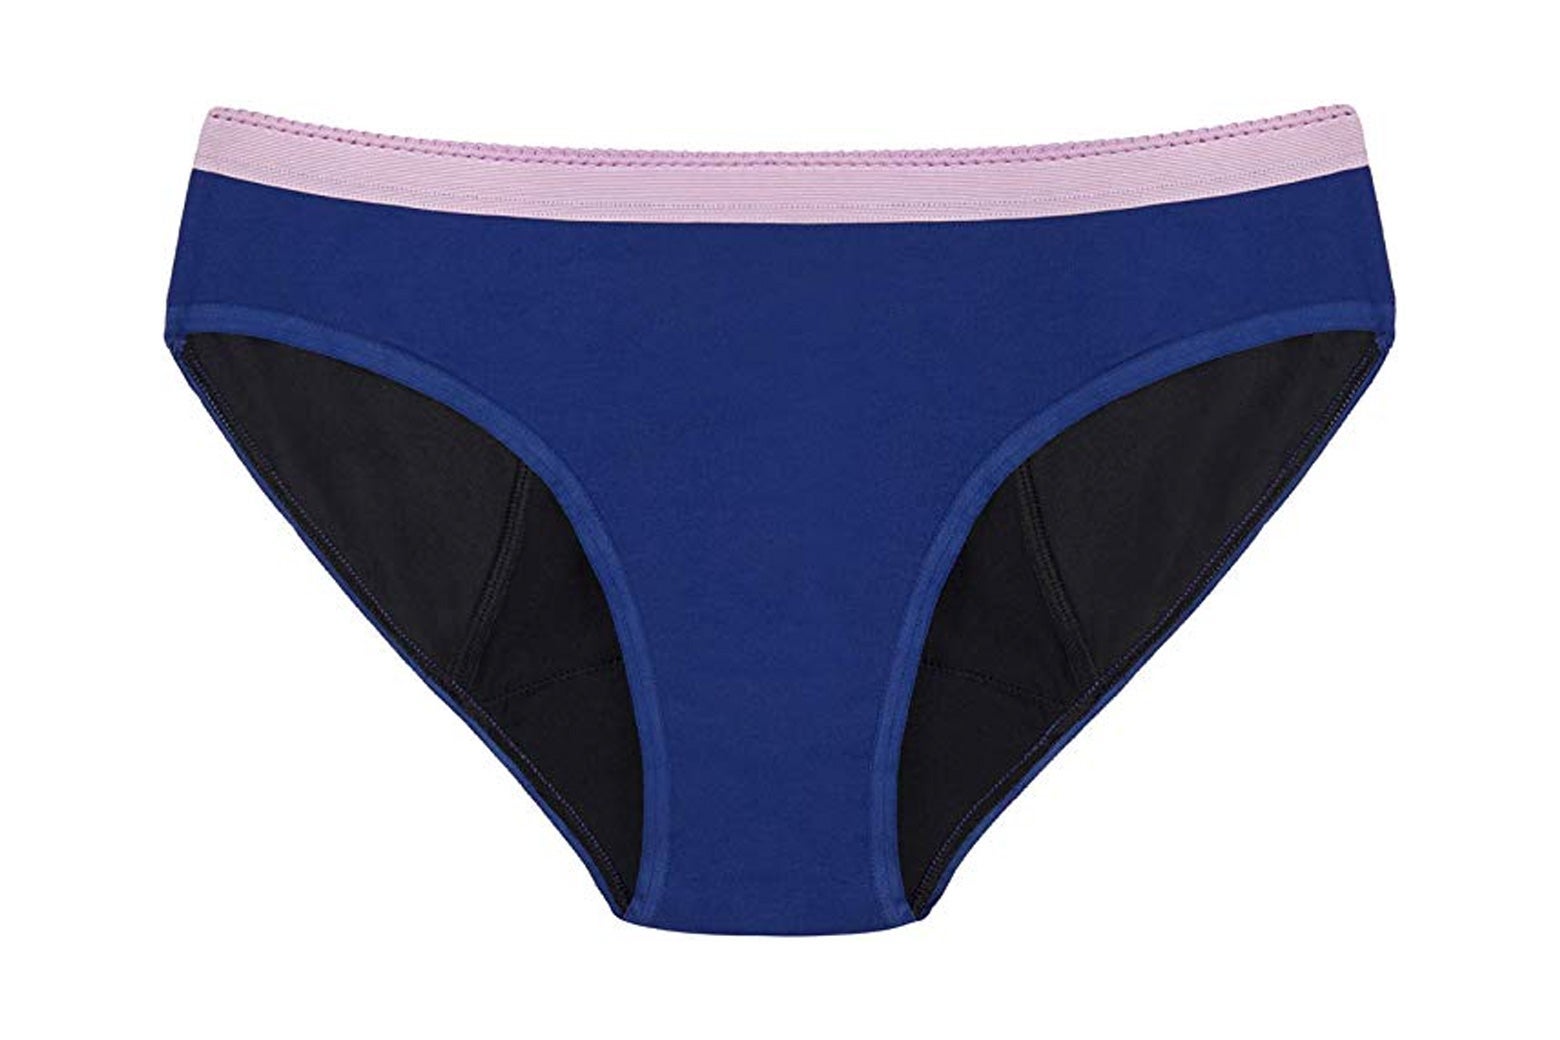 Thinx launches period underwear for teenagers